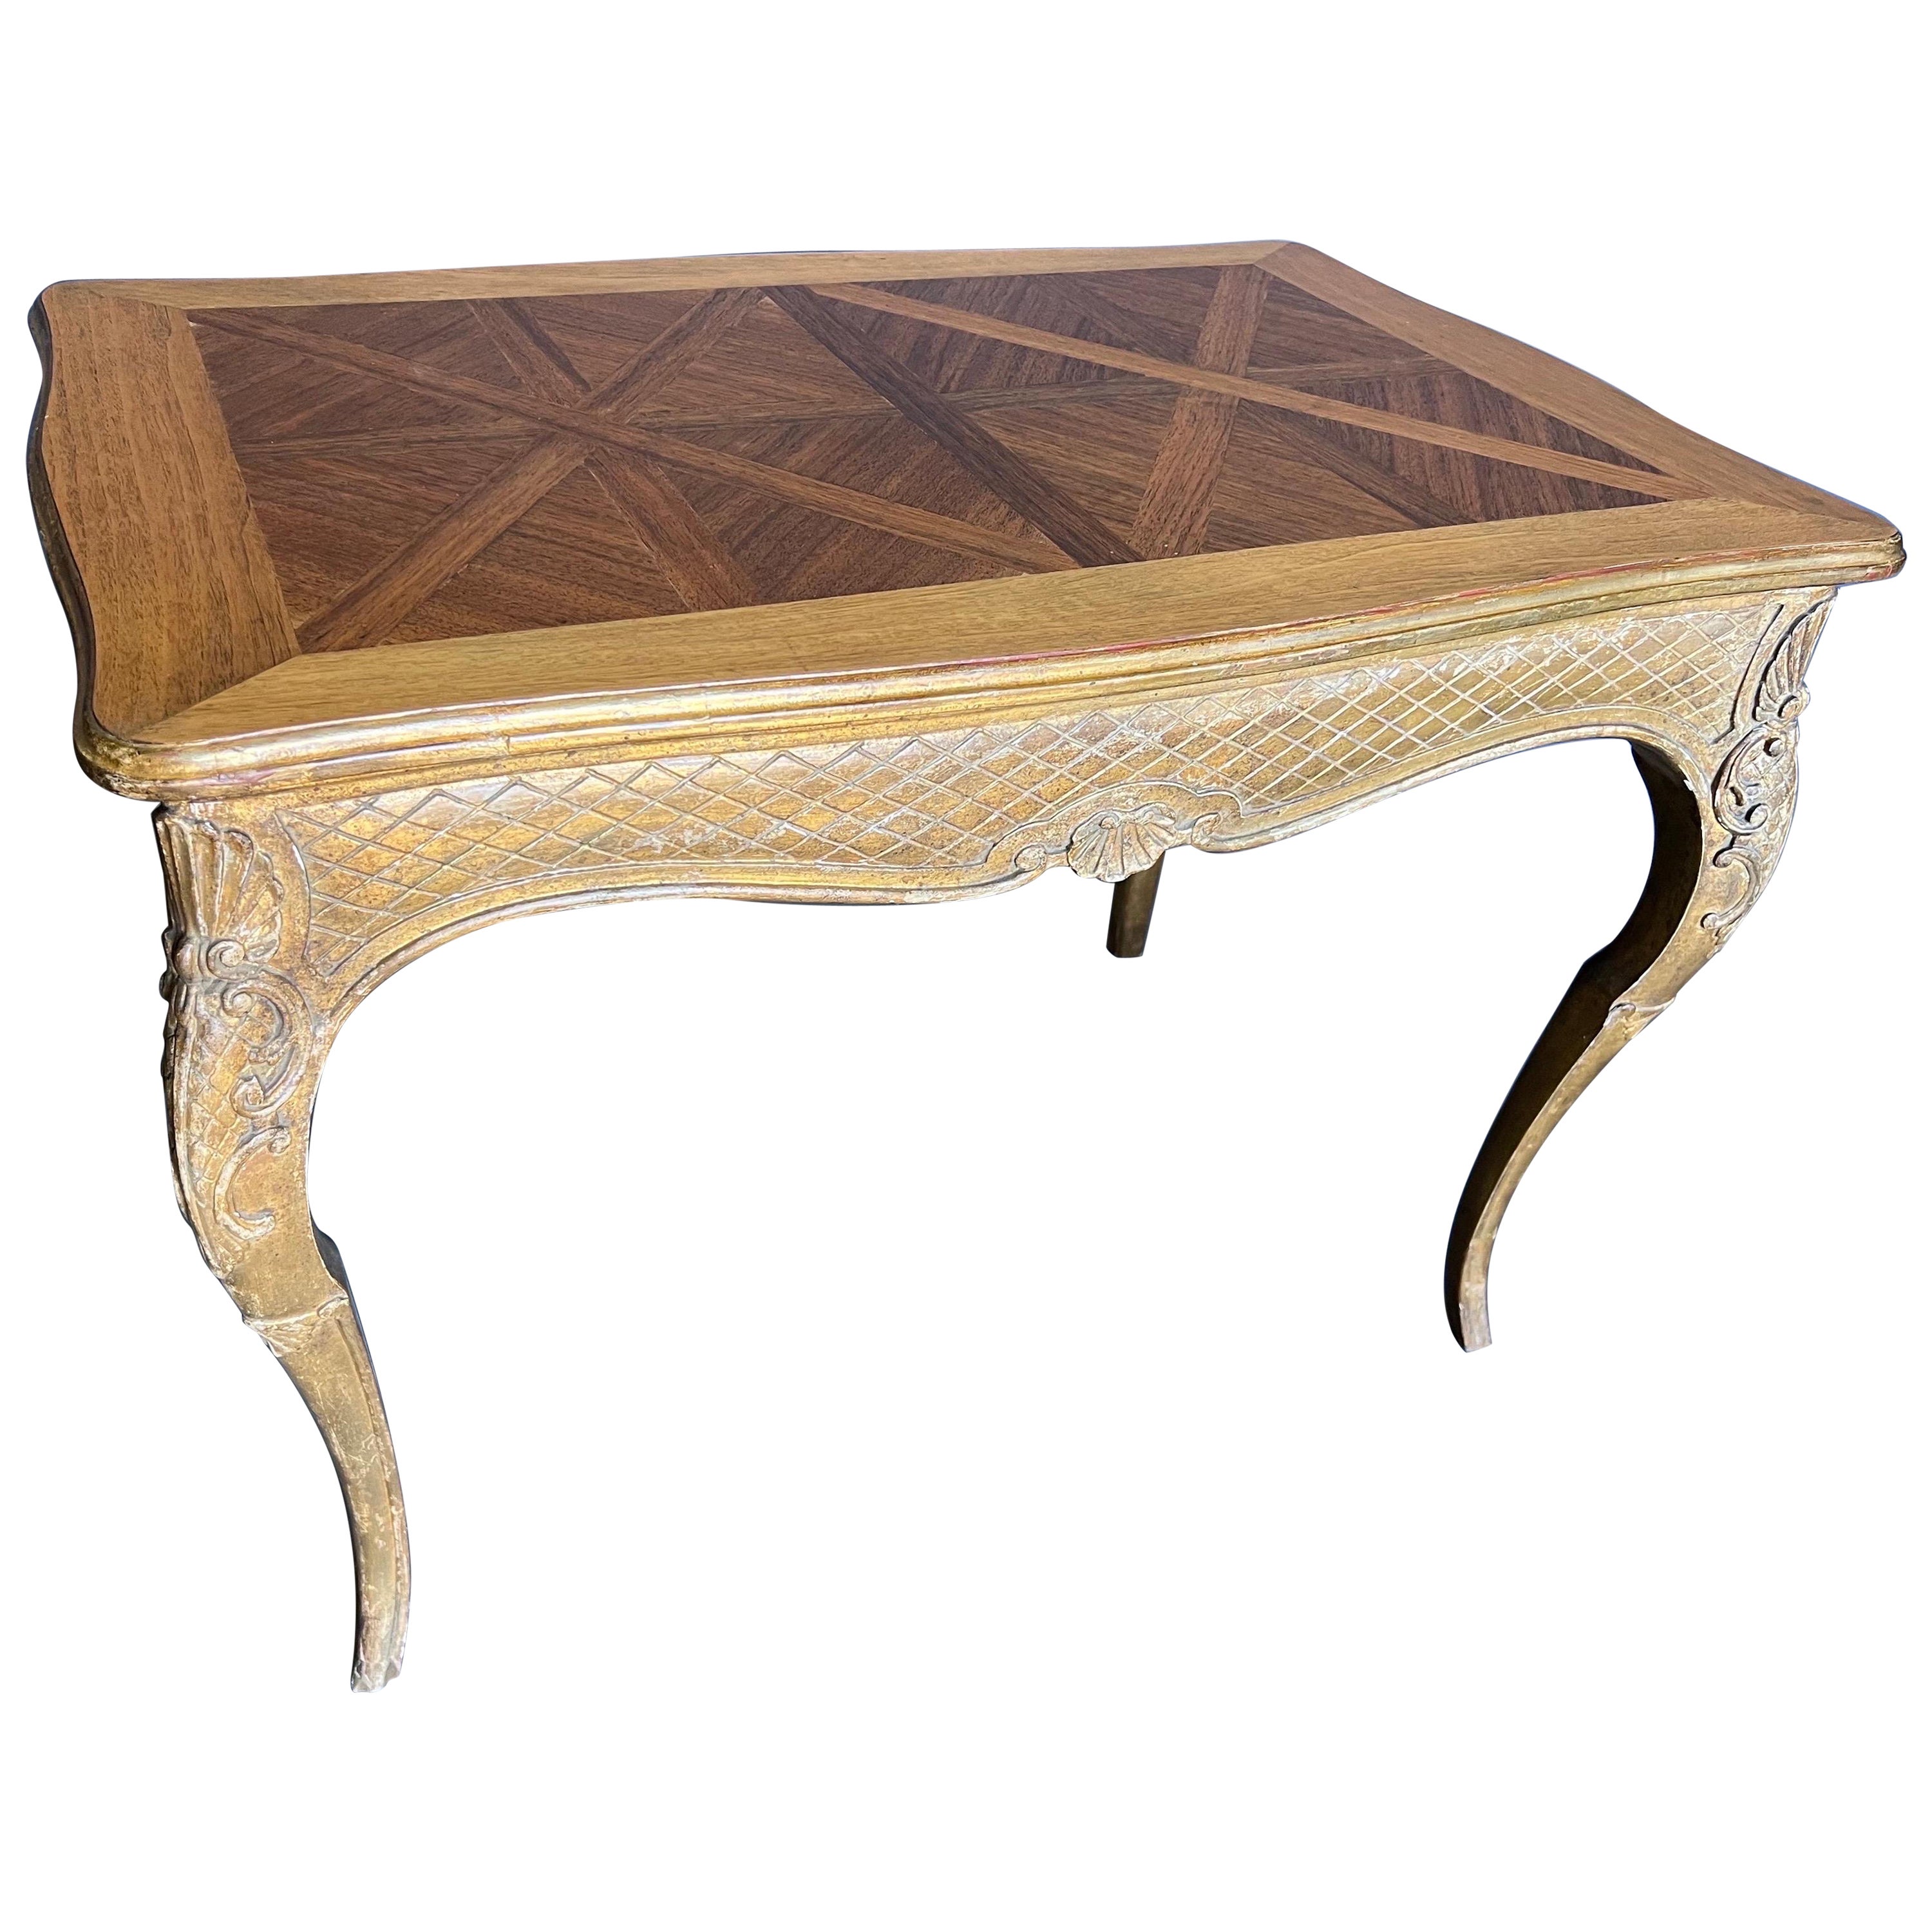 Late 19th Century French Gold Giltwood and Parquetry Top Table  For Sale